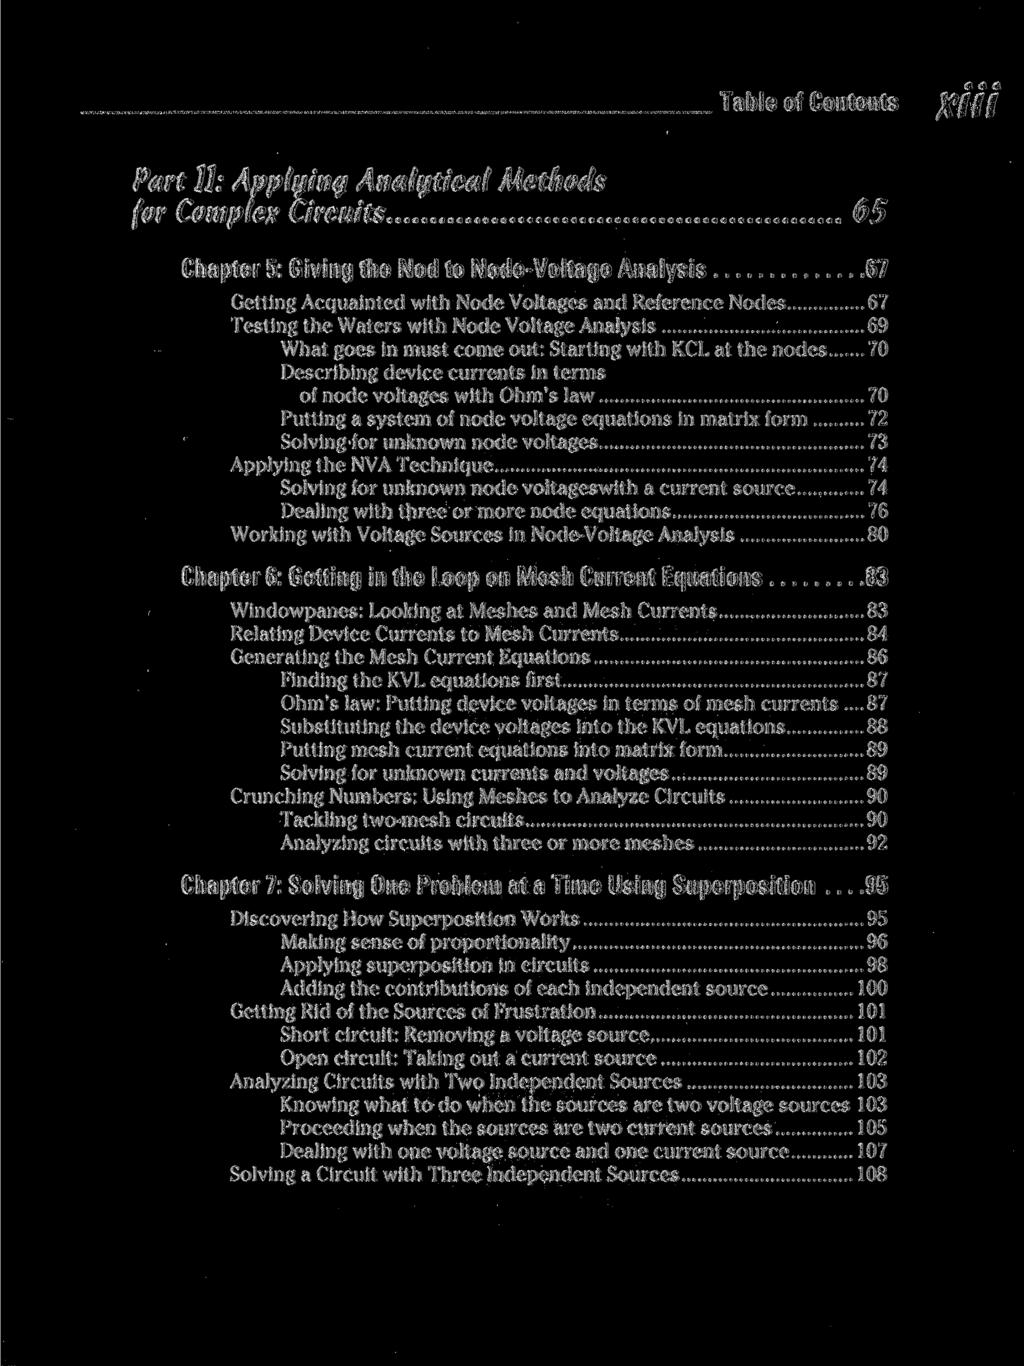 Table of Contents jf/// Part 11: Appluinq Analytical Methods for Complex Circuits 65 Chapter 5: Giving the Nod to Node-Voltage Analysis 67 Getting Acquainted with Node Voltages and Reference Nodes 67